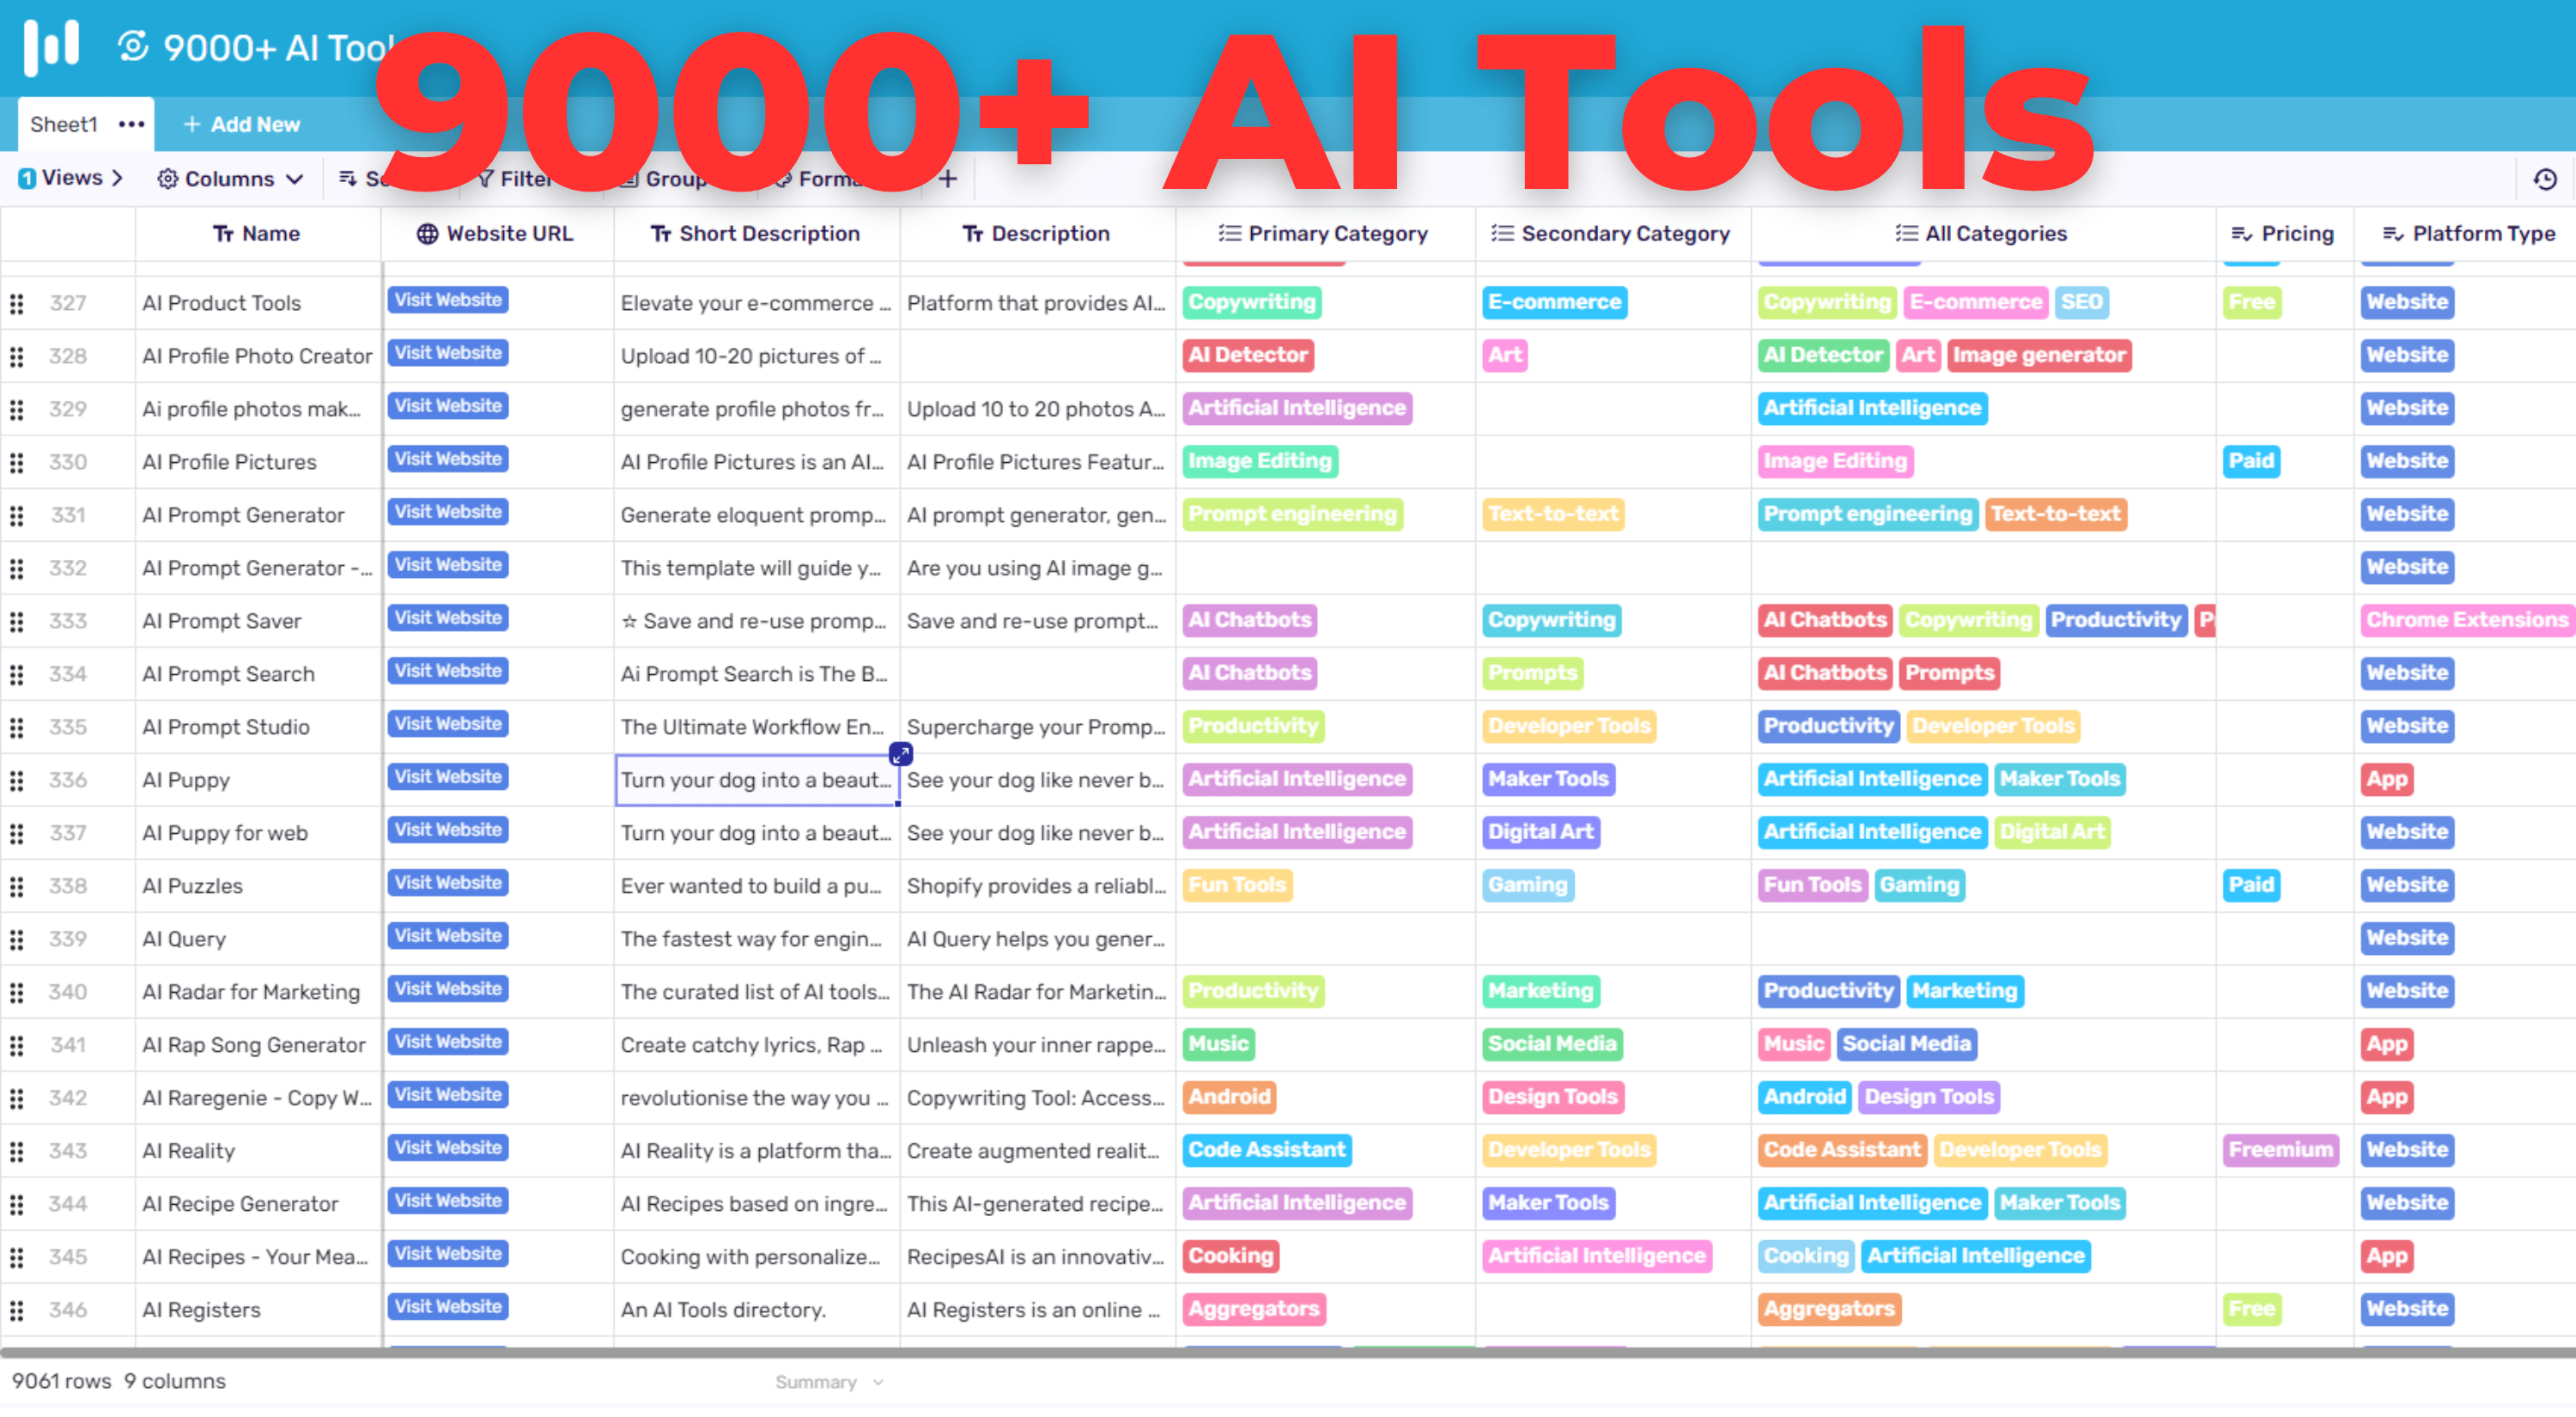 Access To 9000+ AI Tools Database